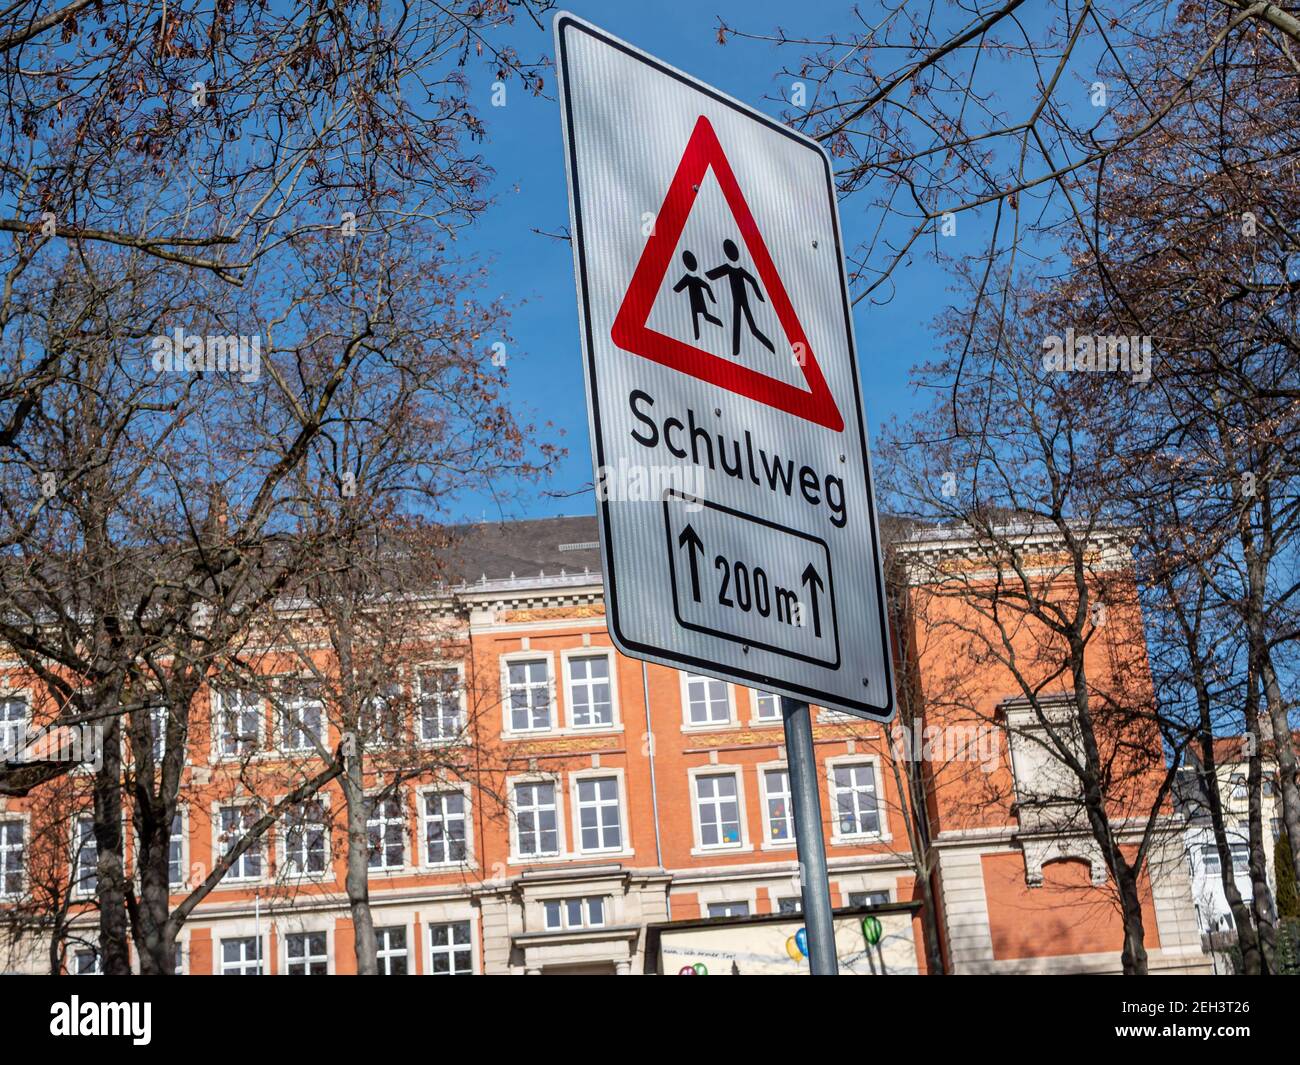 Warning sign on the way to school in Germany Stock Photo